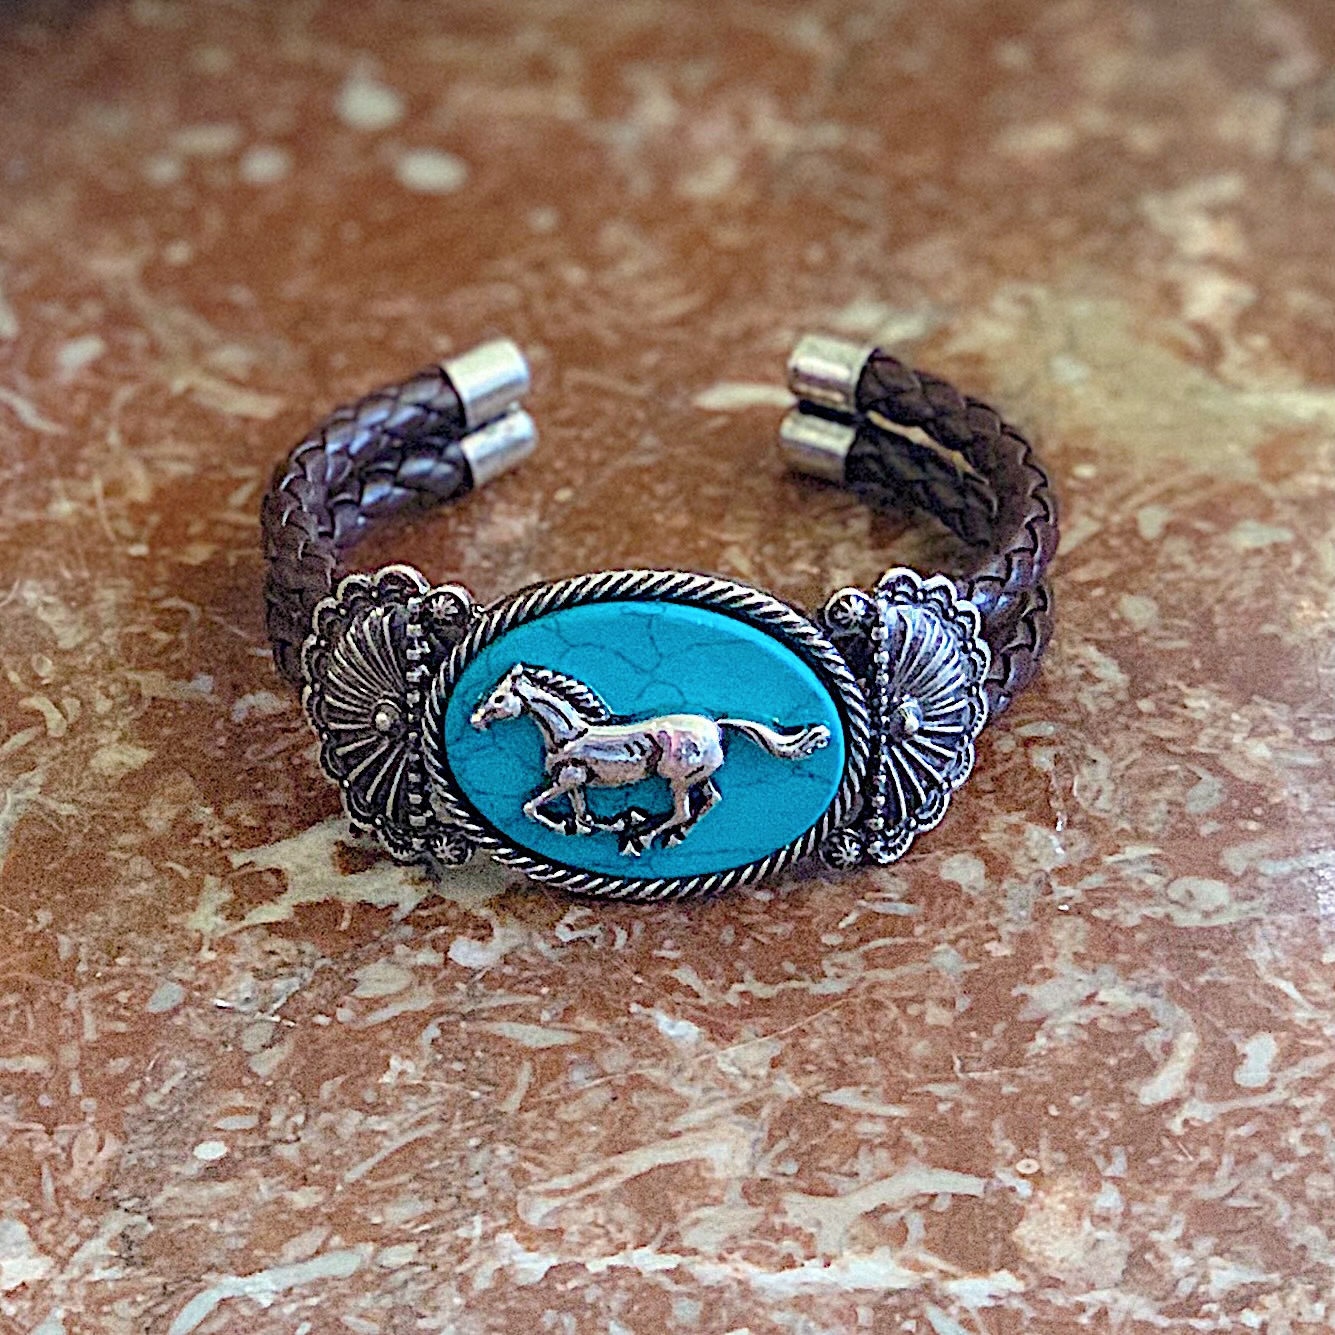 These cuffs are beautiful with the brown, silver, and turquoise combination!